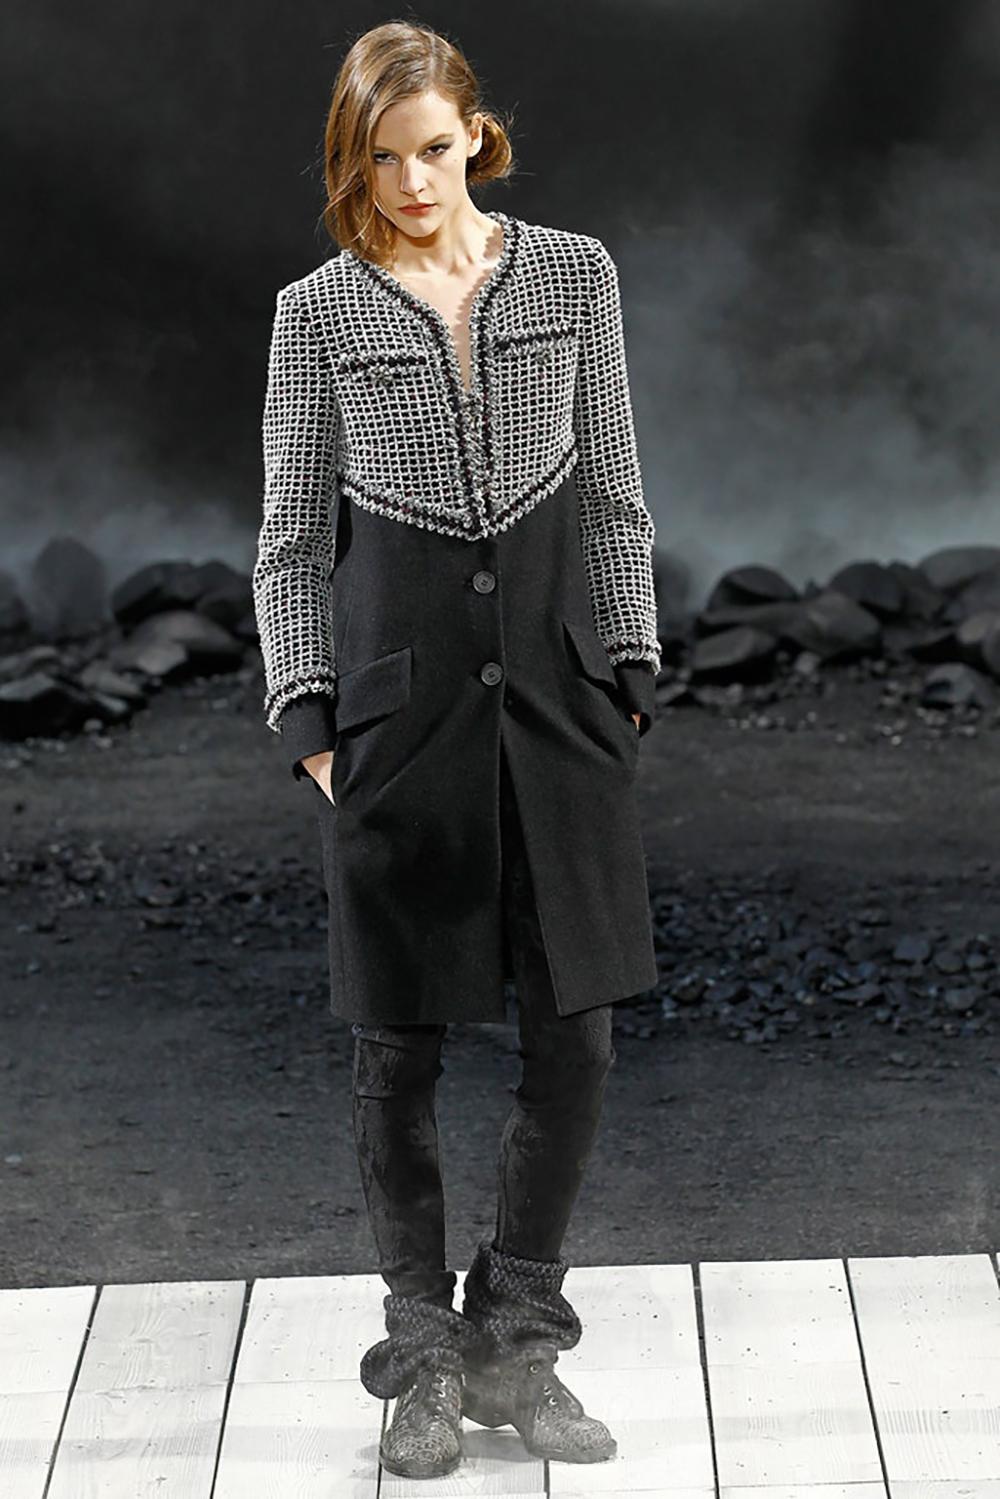 New Chanel combo tweed jacket from Runway of 2011 Fall collection 11A by Karl Lagerfeld.
Retail price was very high. As seen on Miroslava Duma and many other celebs.
Stunning CC logo jewel Gripoix buttons, Fully lined with black silk.
Size mark 36